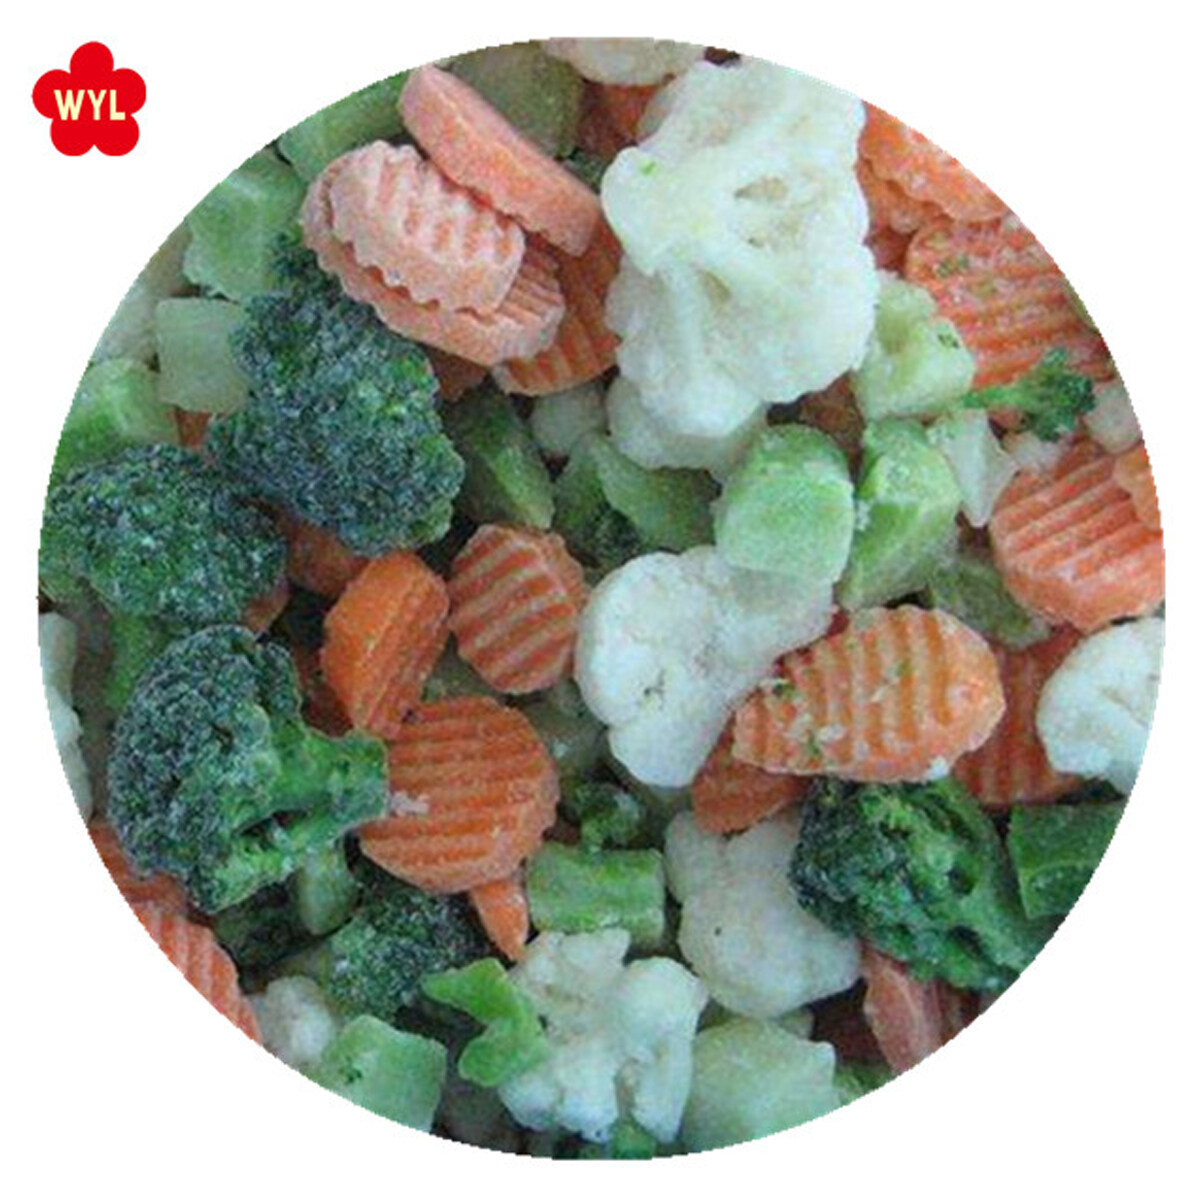 iqf frozen okra manufacturers, High Quality mixed vegetables canned, Custom 4 mixed vegetables, frozen hawaian mix vegetable manufacturers, frozen hawaiian mixed vegetable Factory